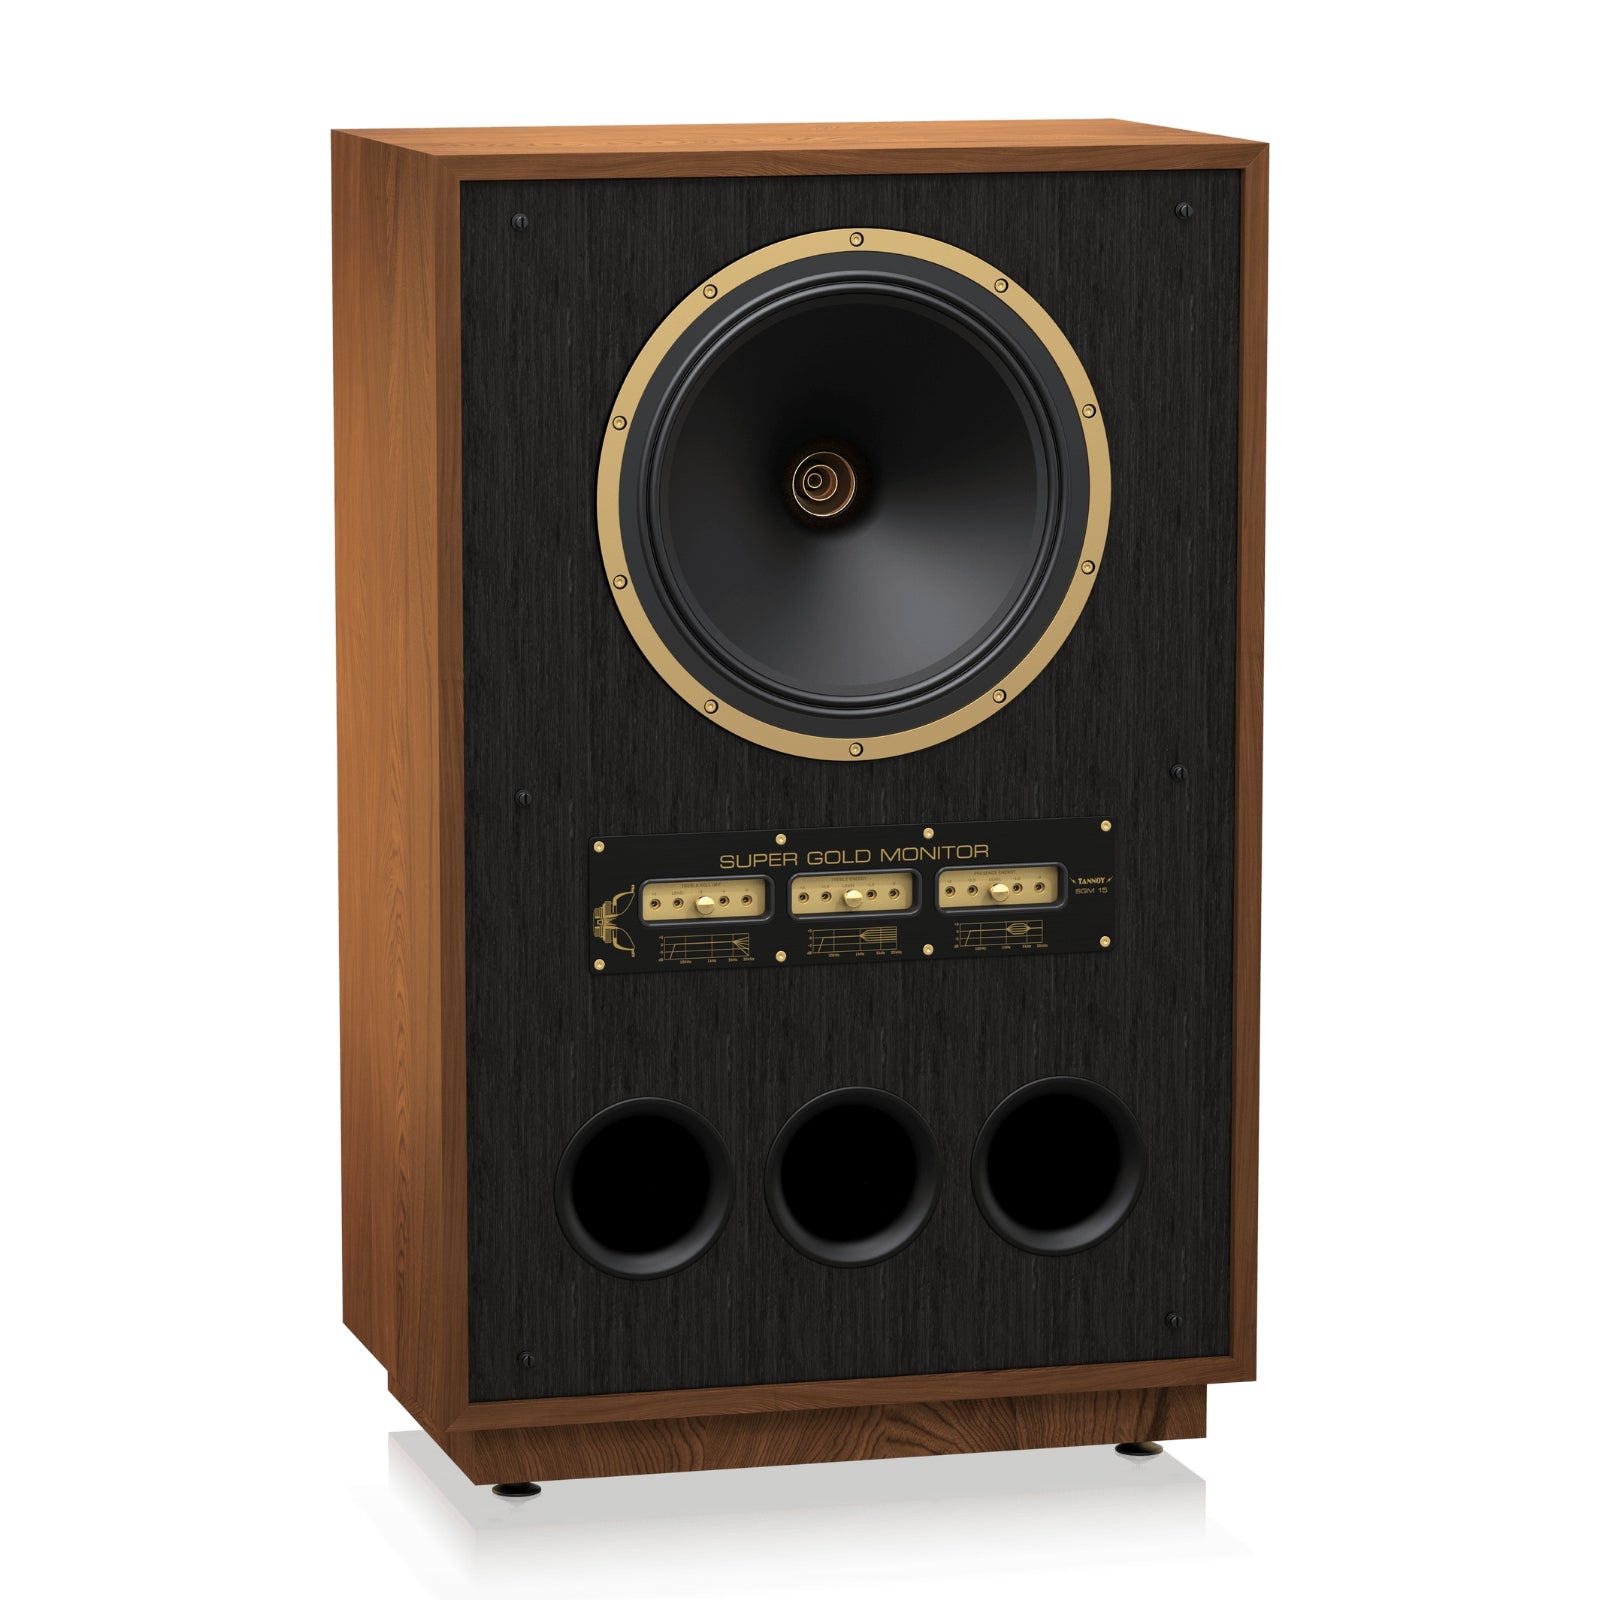 Tannoy SGM 15 - Super Gold Monitor Series